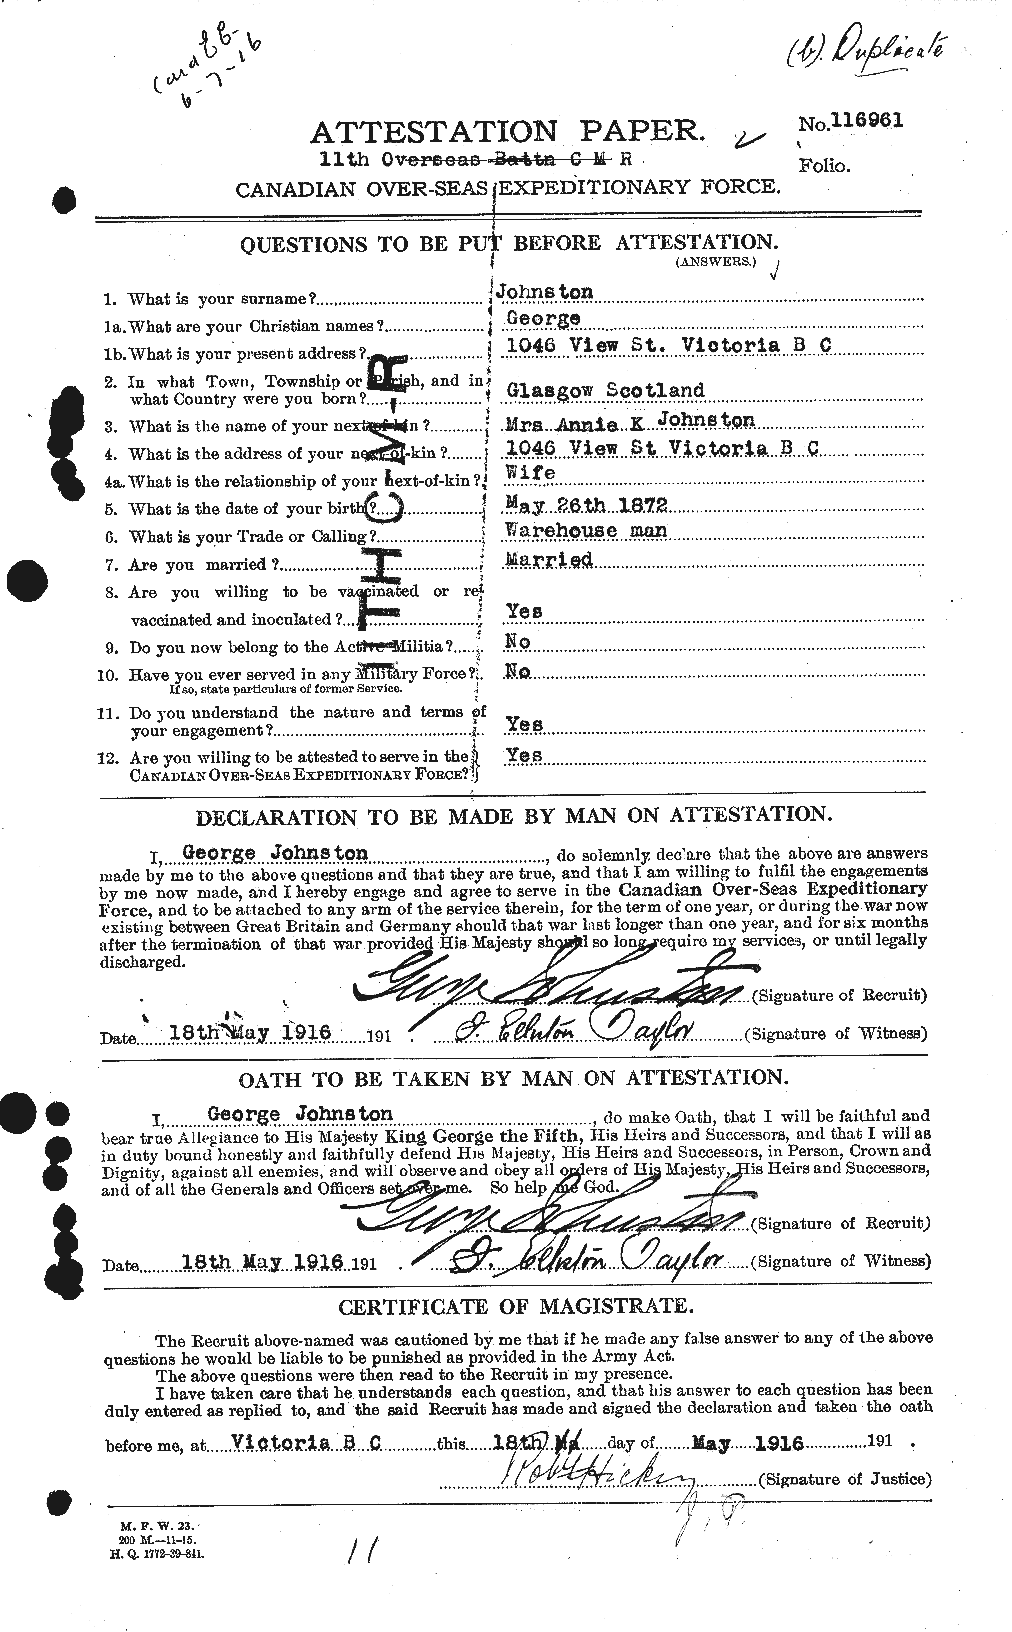 Personnel Records of the First World War - CEF 424095a